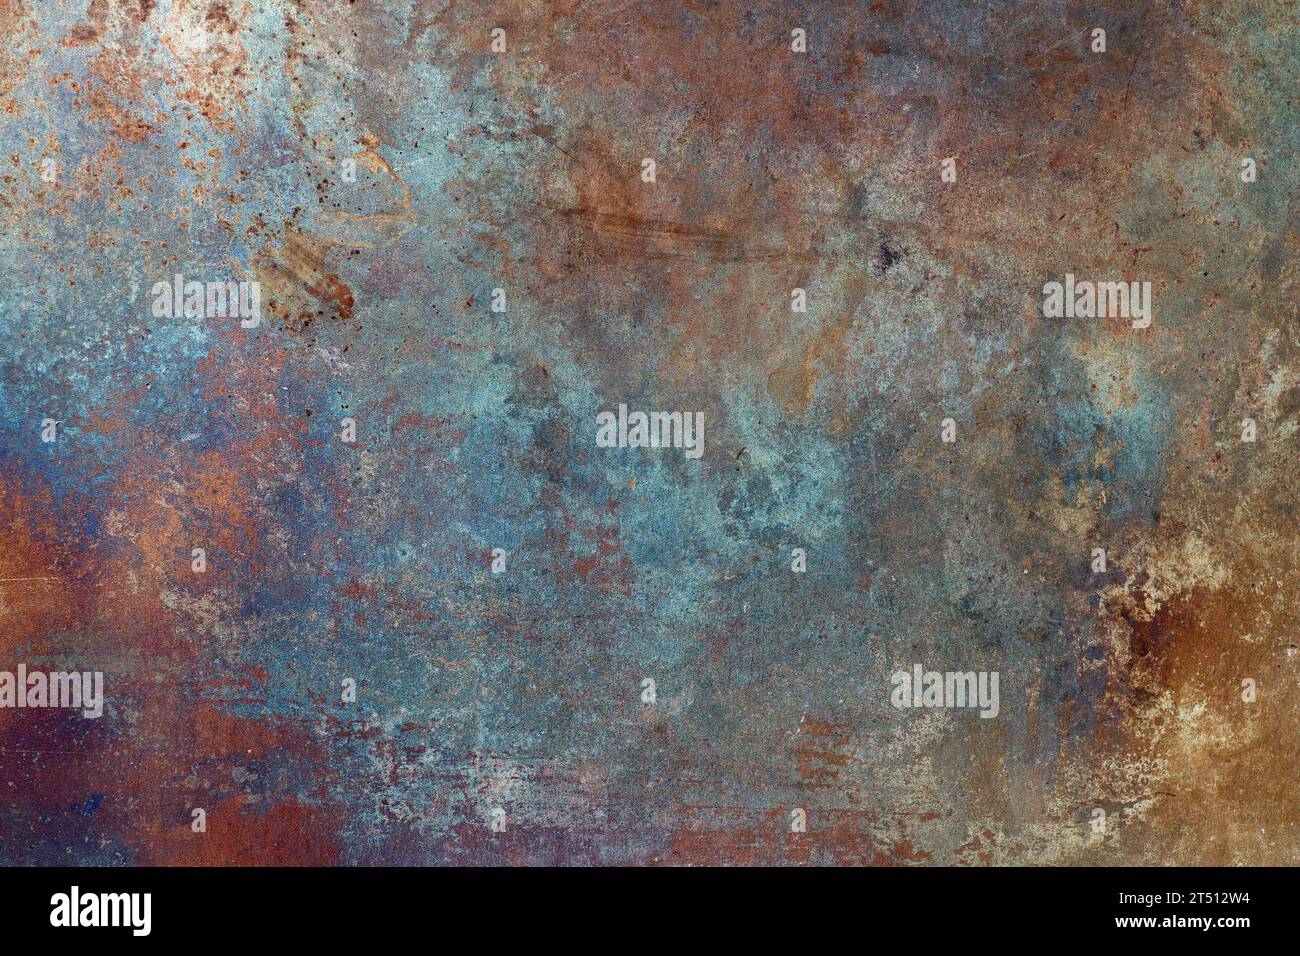 Rusty surface of old dirty iron plate Stock Photo